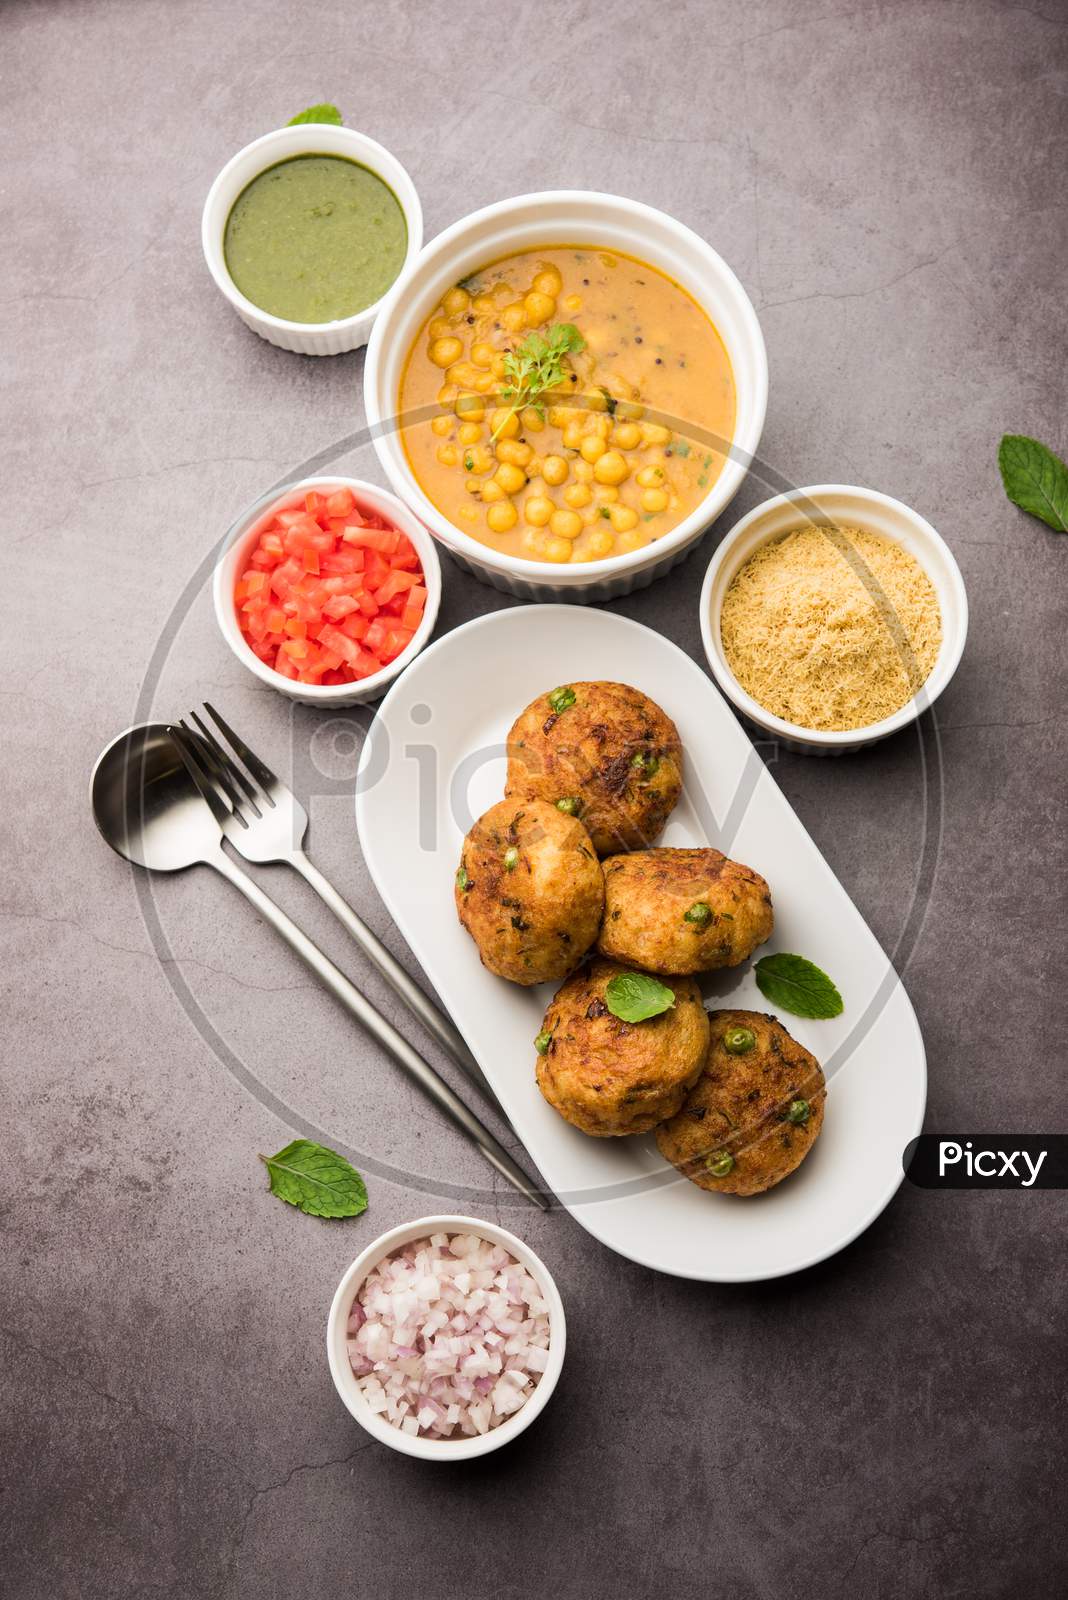 Indian Aloo Tikki Or Potato Cutlet Is Made Out Of Boiled Potatoes, Peas, And Various Curry Spices